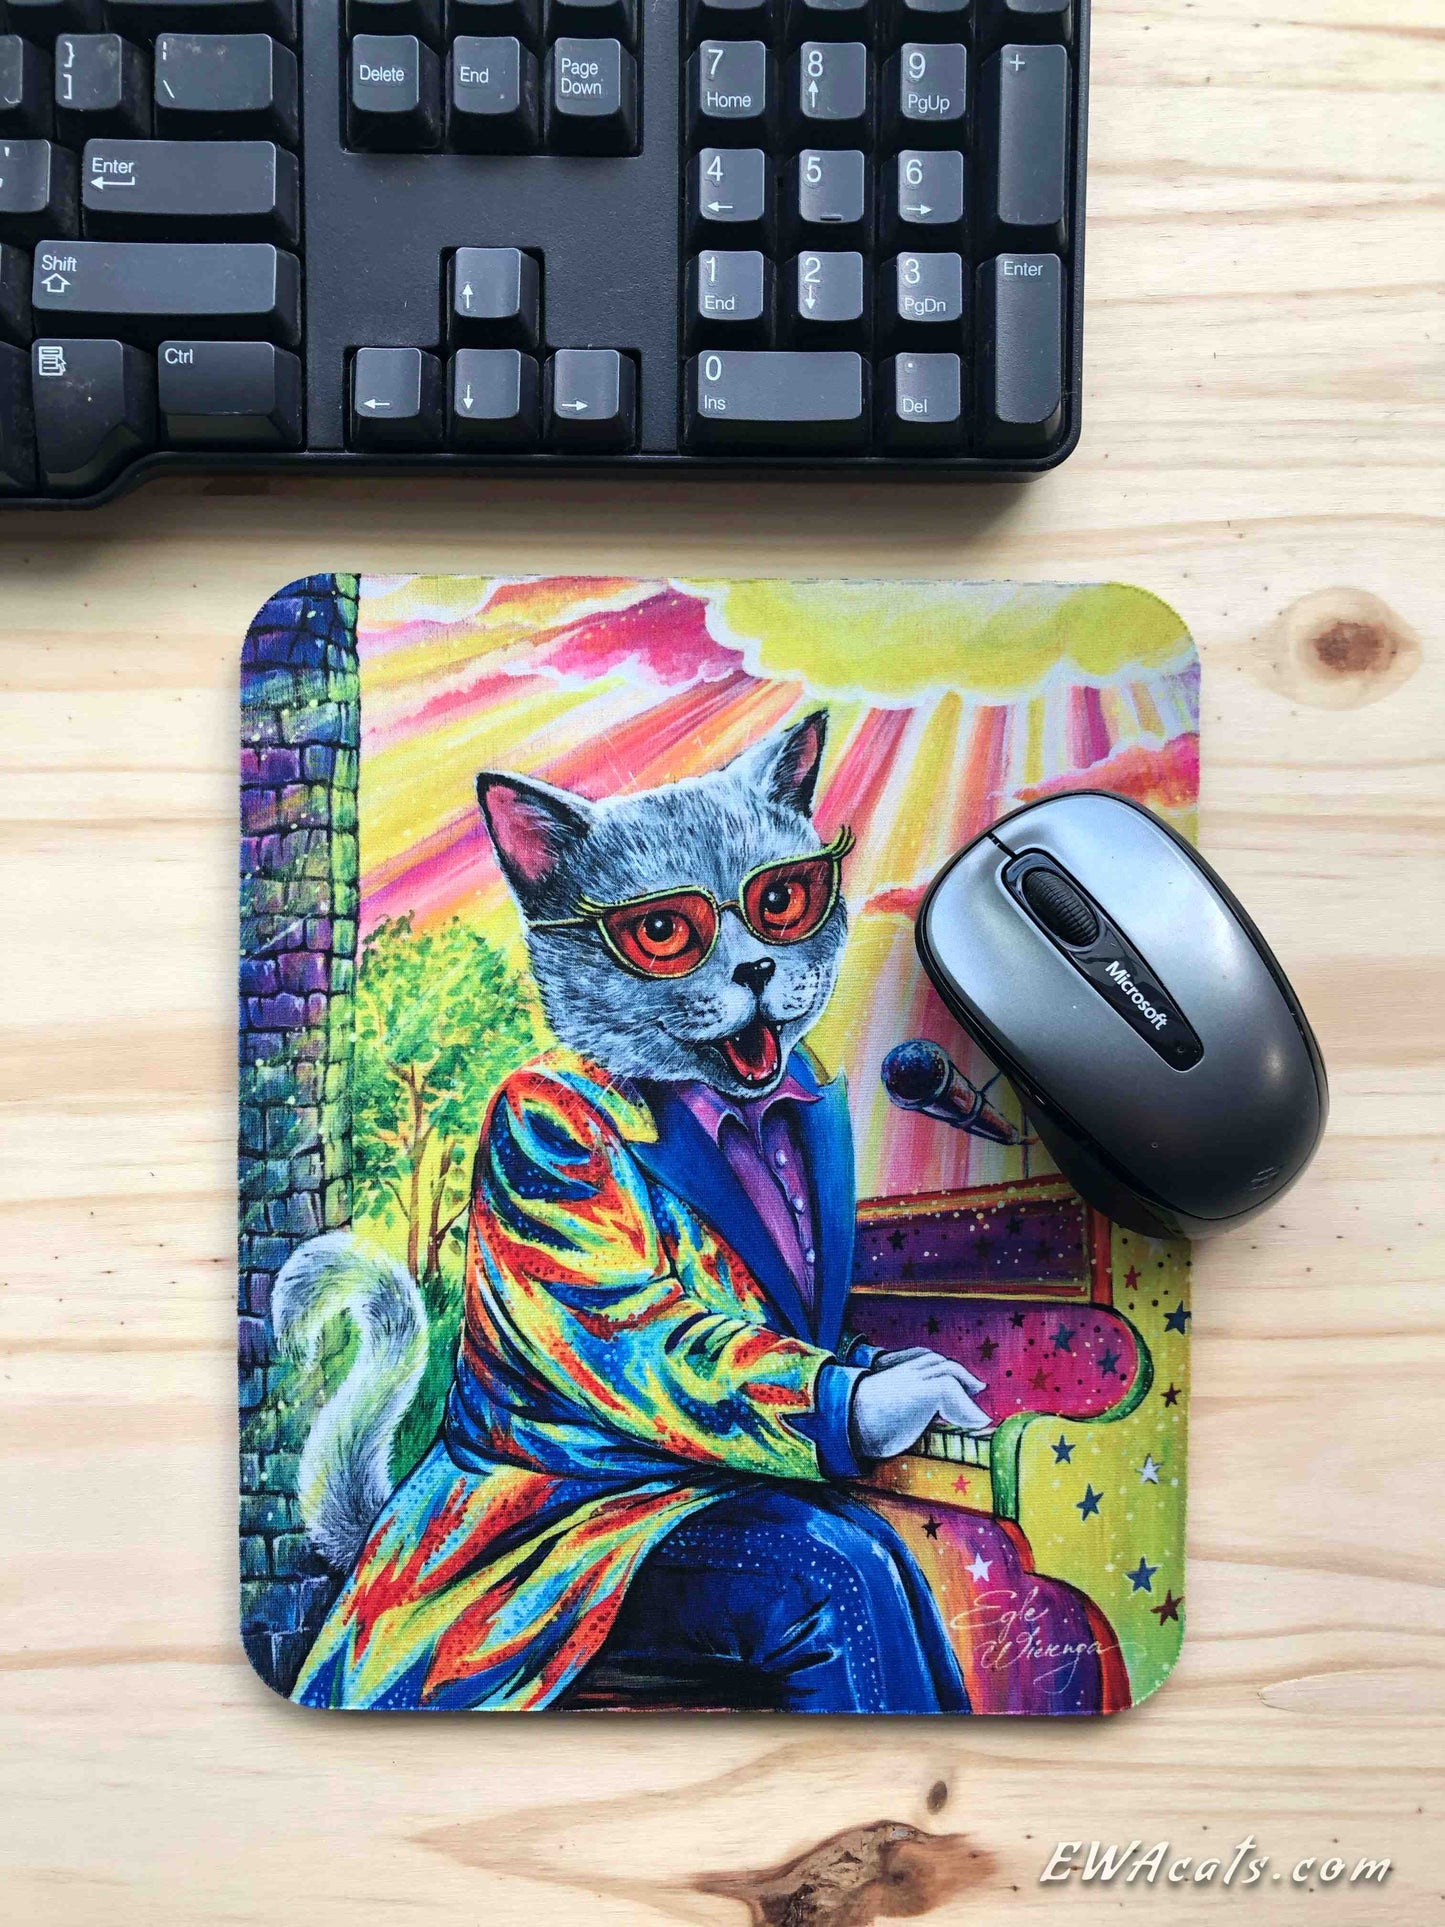 Mouse Pad "I'm Still Meowing"